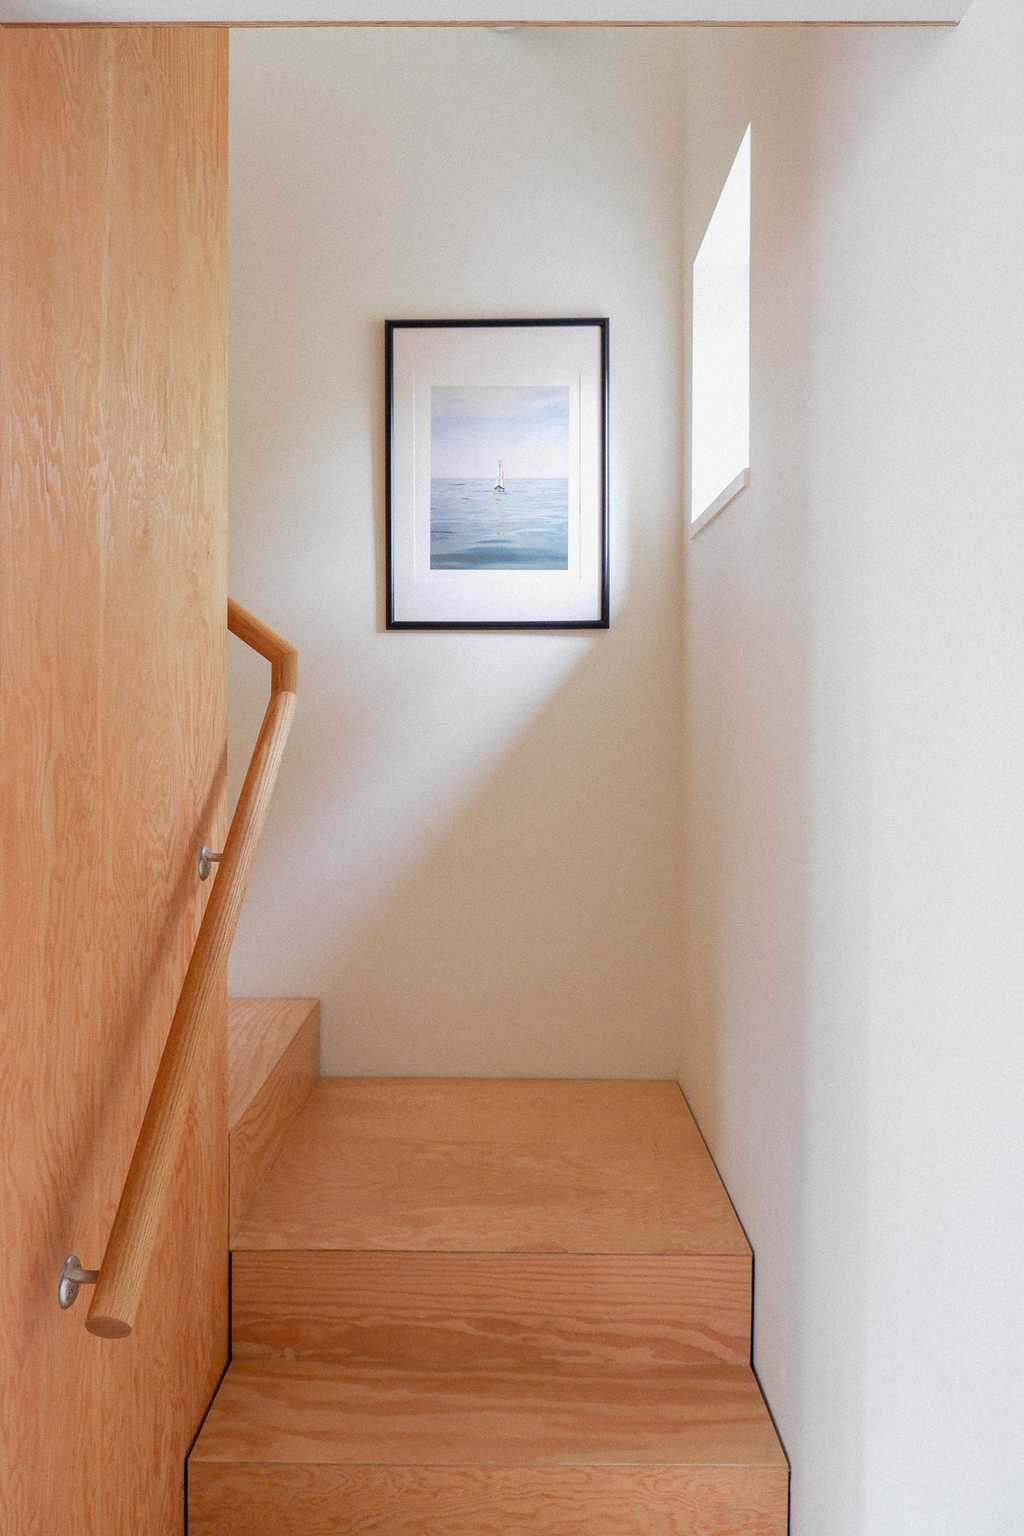 Stairs in Airbnb rental